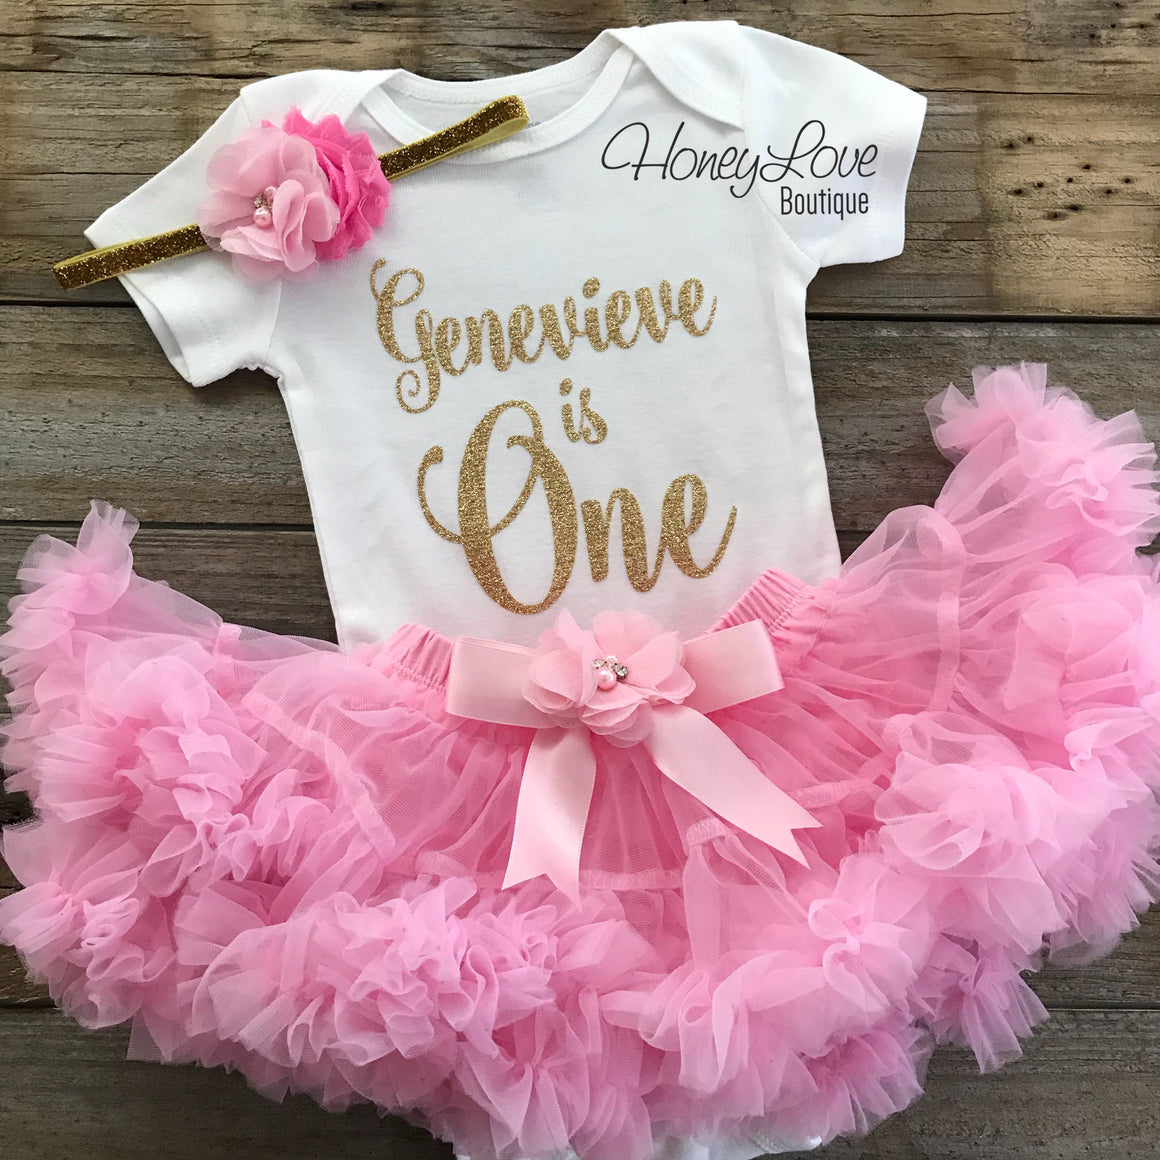 Personalized Name "is One" - 1st Birthday Outfit - Light Pink and Silver/Gold Glitter - embellished pettiskirt - HoneyLoveBoutique